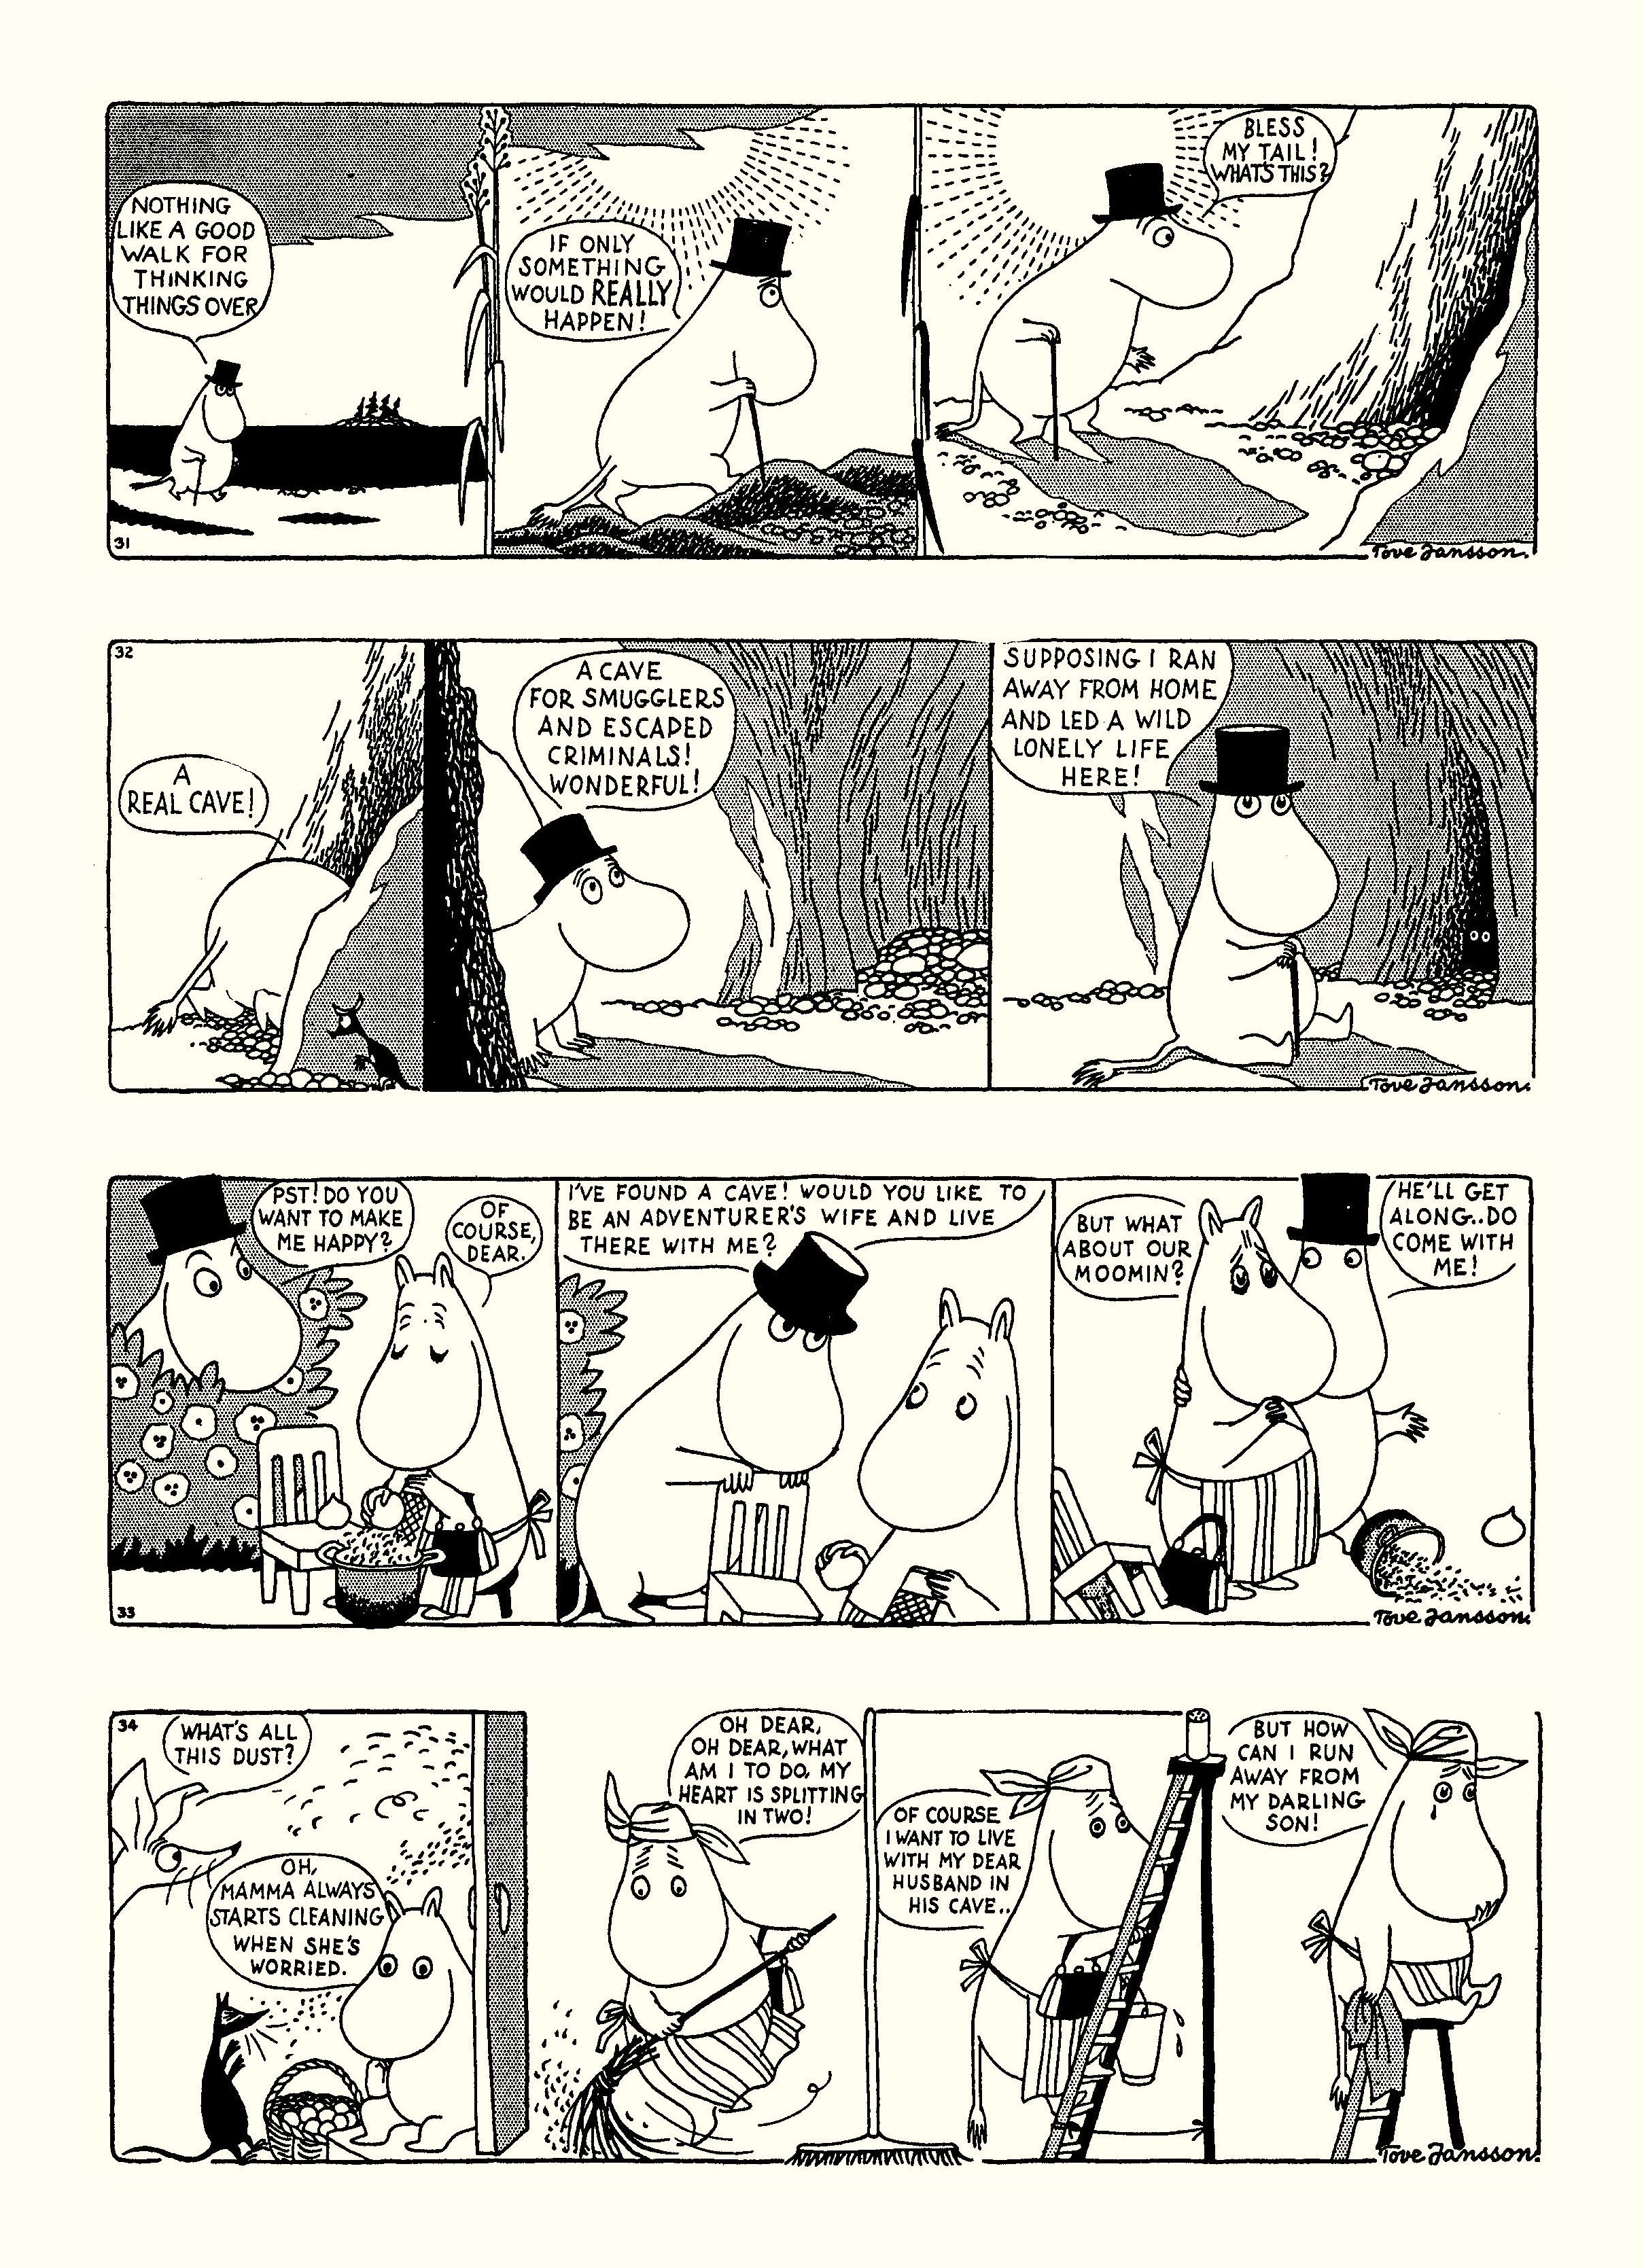 Read online Moomin: The Complete Tove Jansson Comic Strip comic -  Issue # TPB 1 - 38